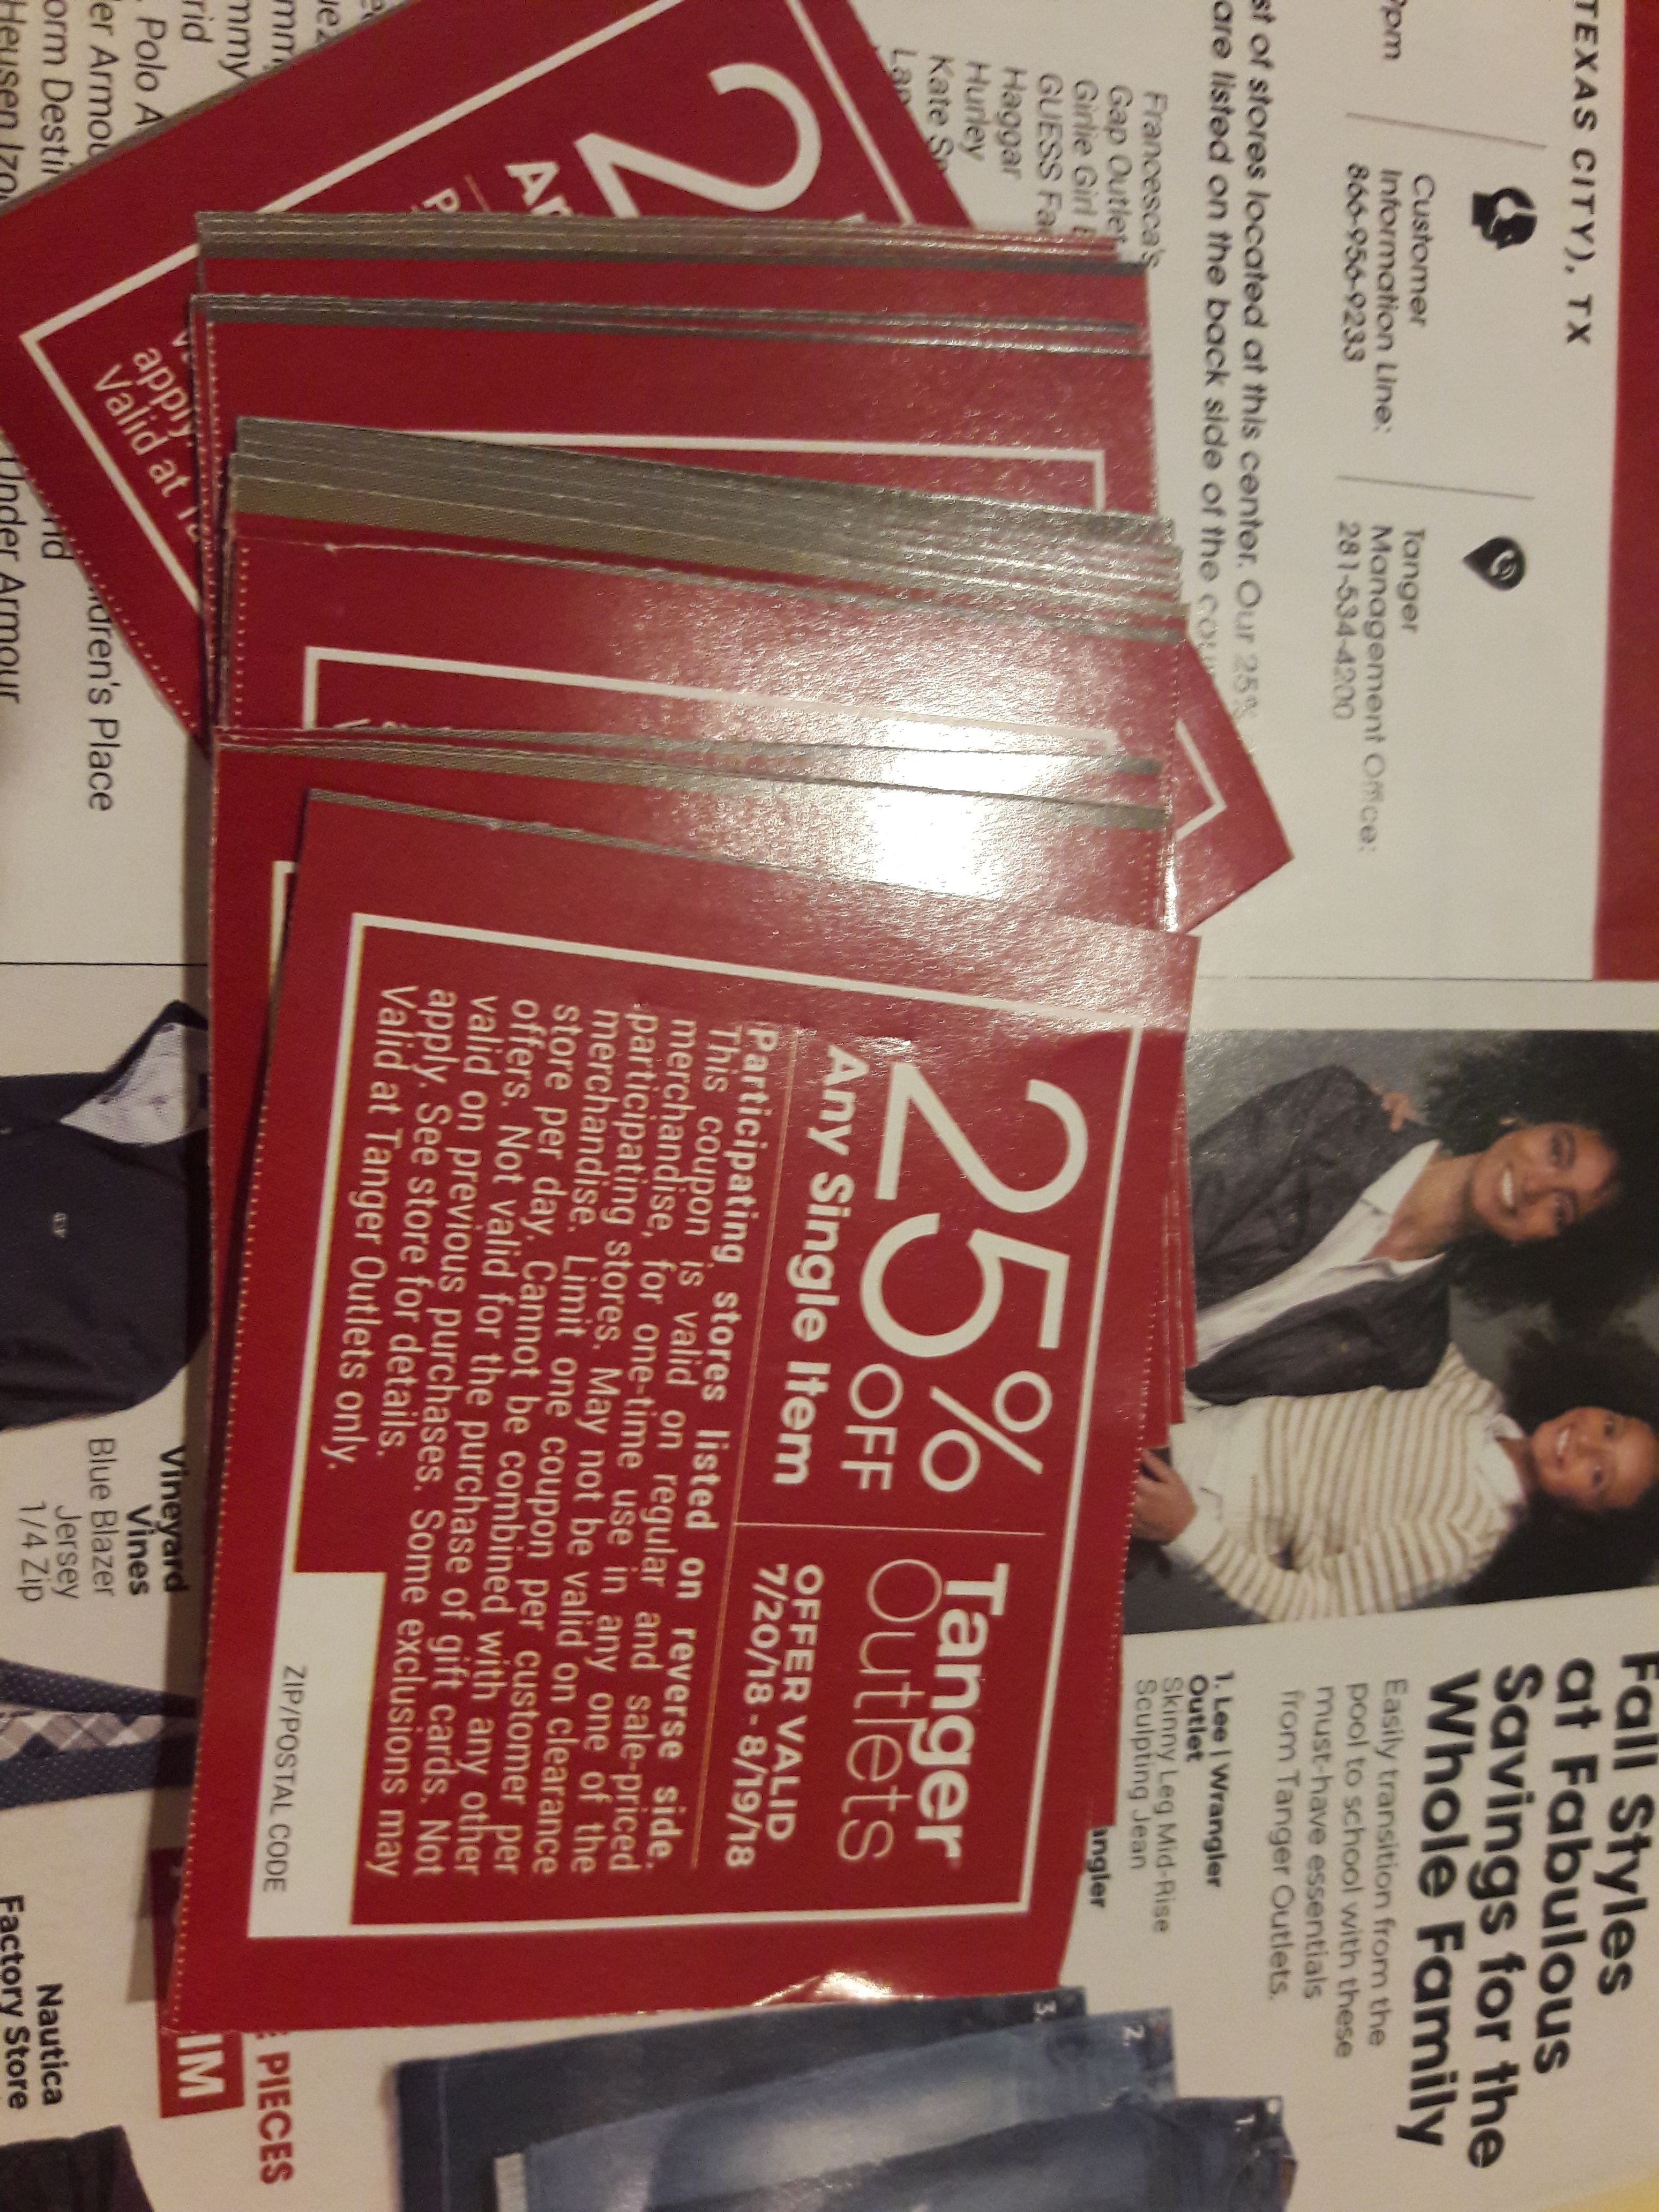 Tanger Outlets 25% off coupons (20) for Sale in Rosharon, TX - OfferUp